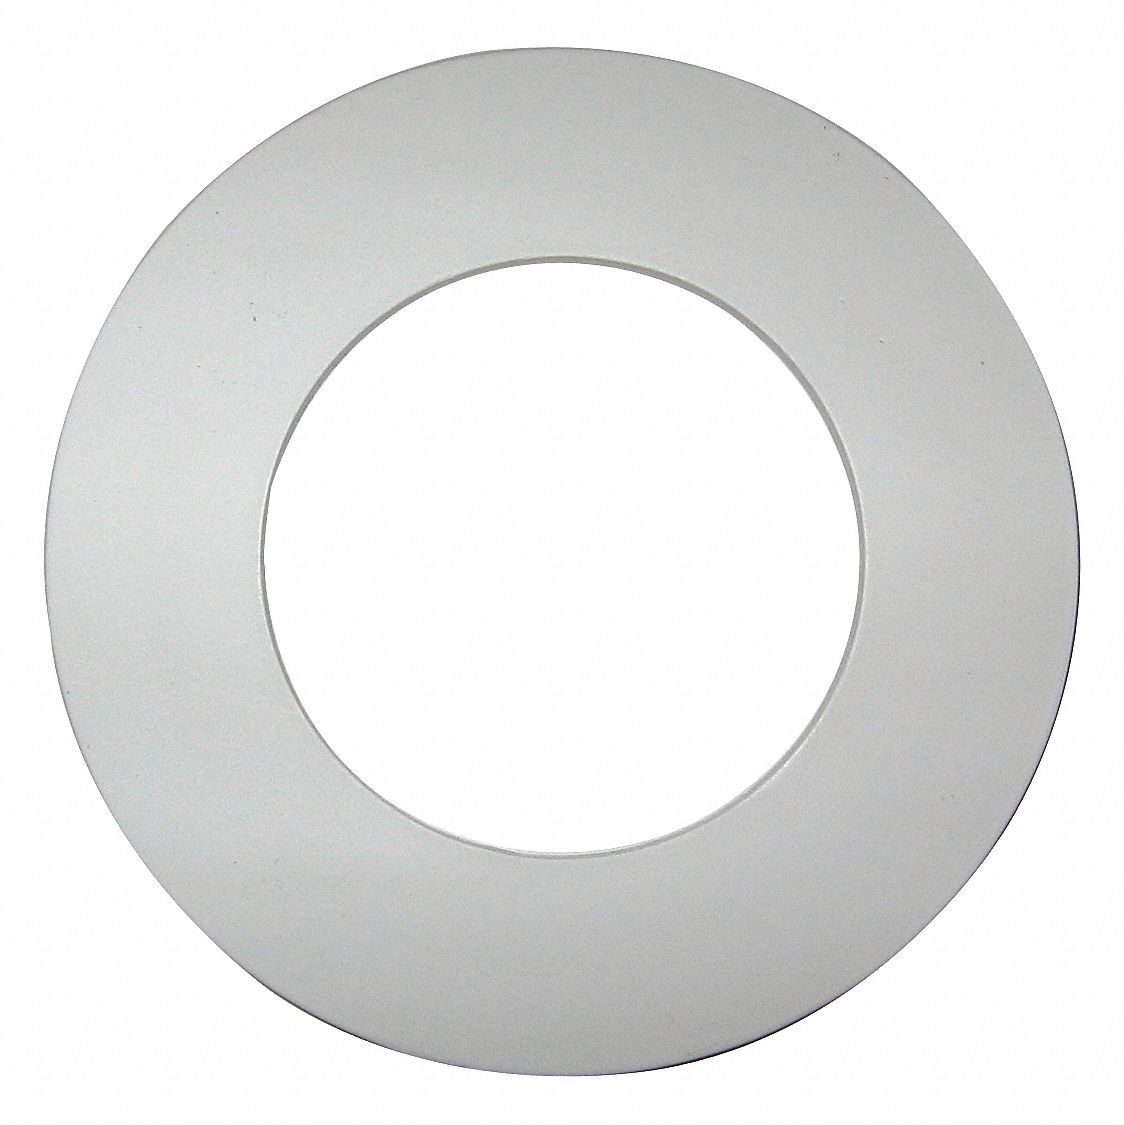 Flange Gasket: 3 in Pipe Size, 5 3/8 in Outside Dia., 3 1/2 in Inside Dia., 1/8 in Thick